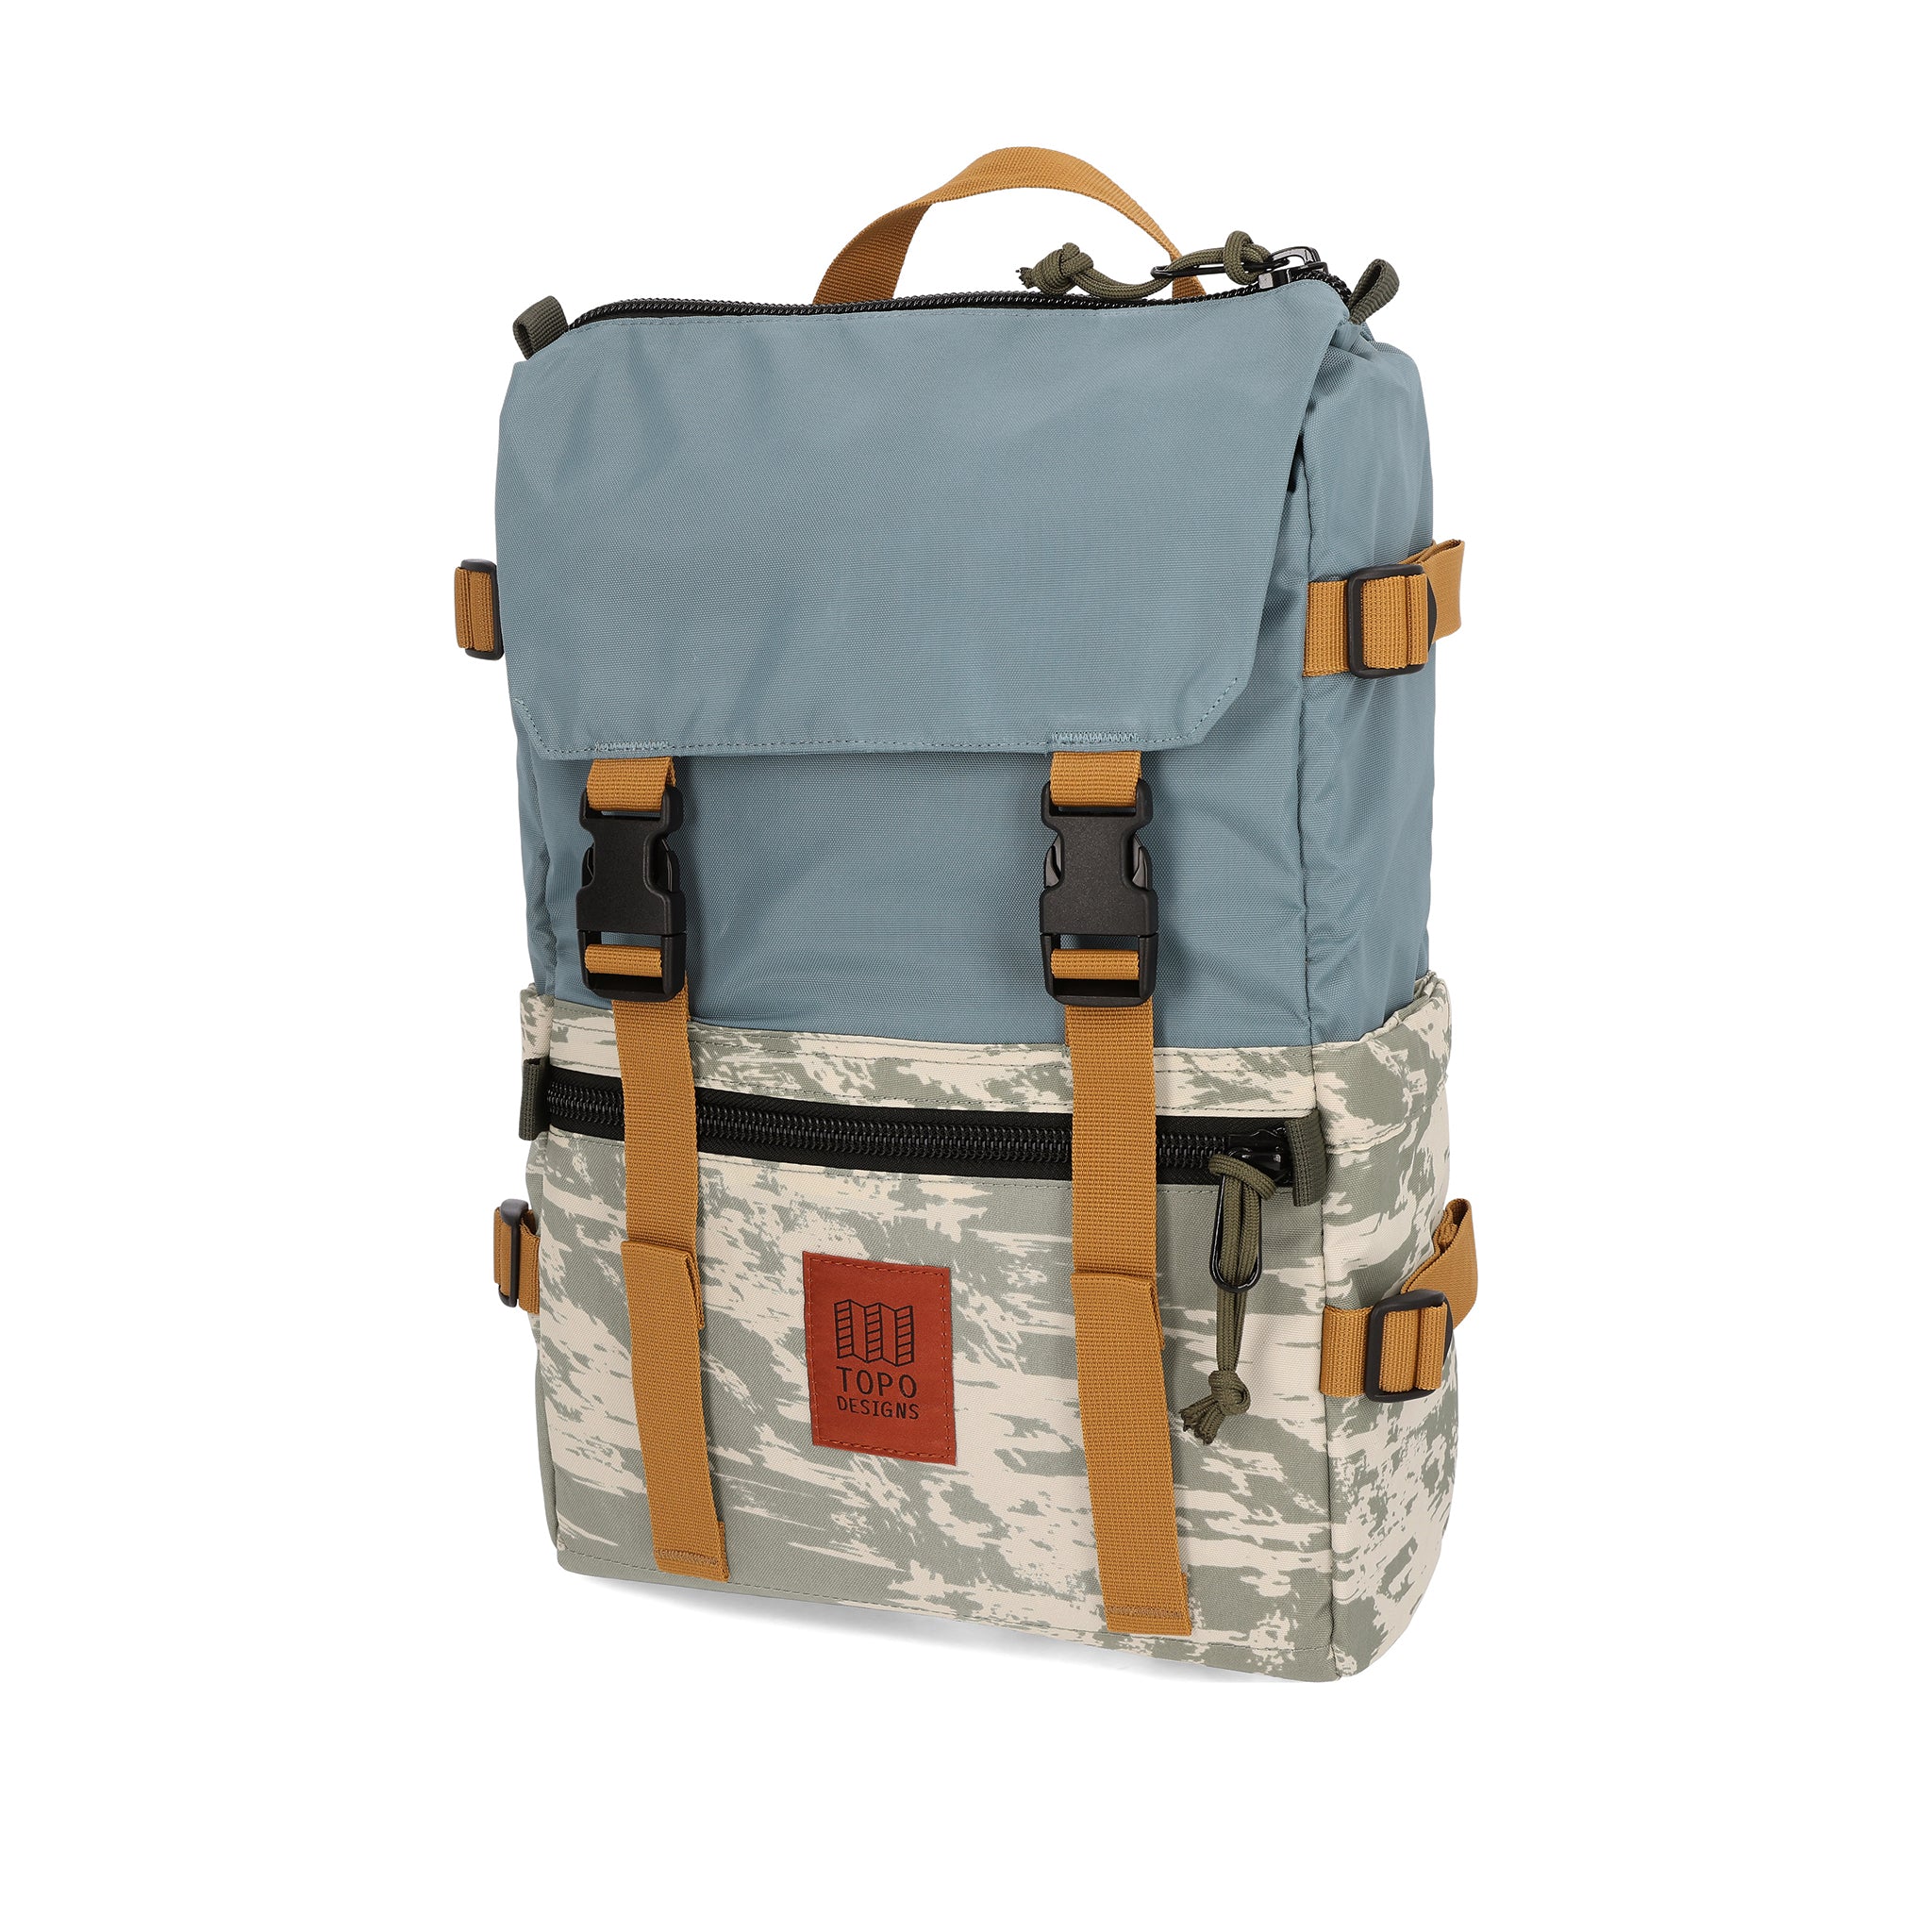 Rover Pack Classic Printed Topo Designs